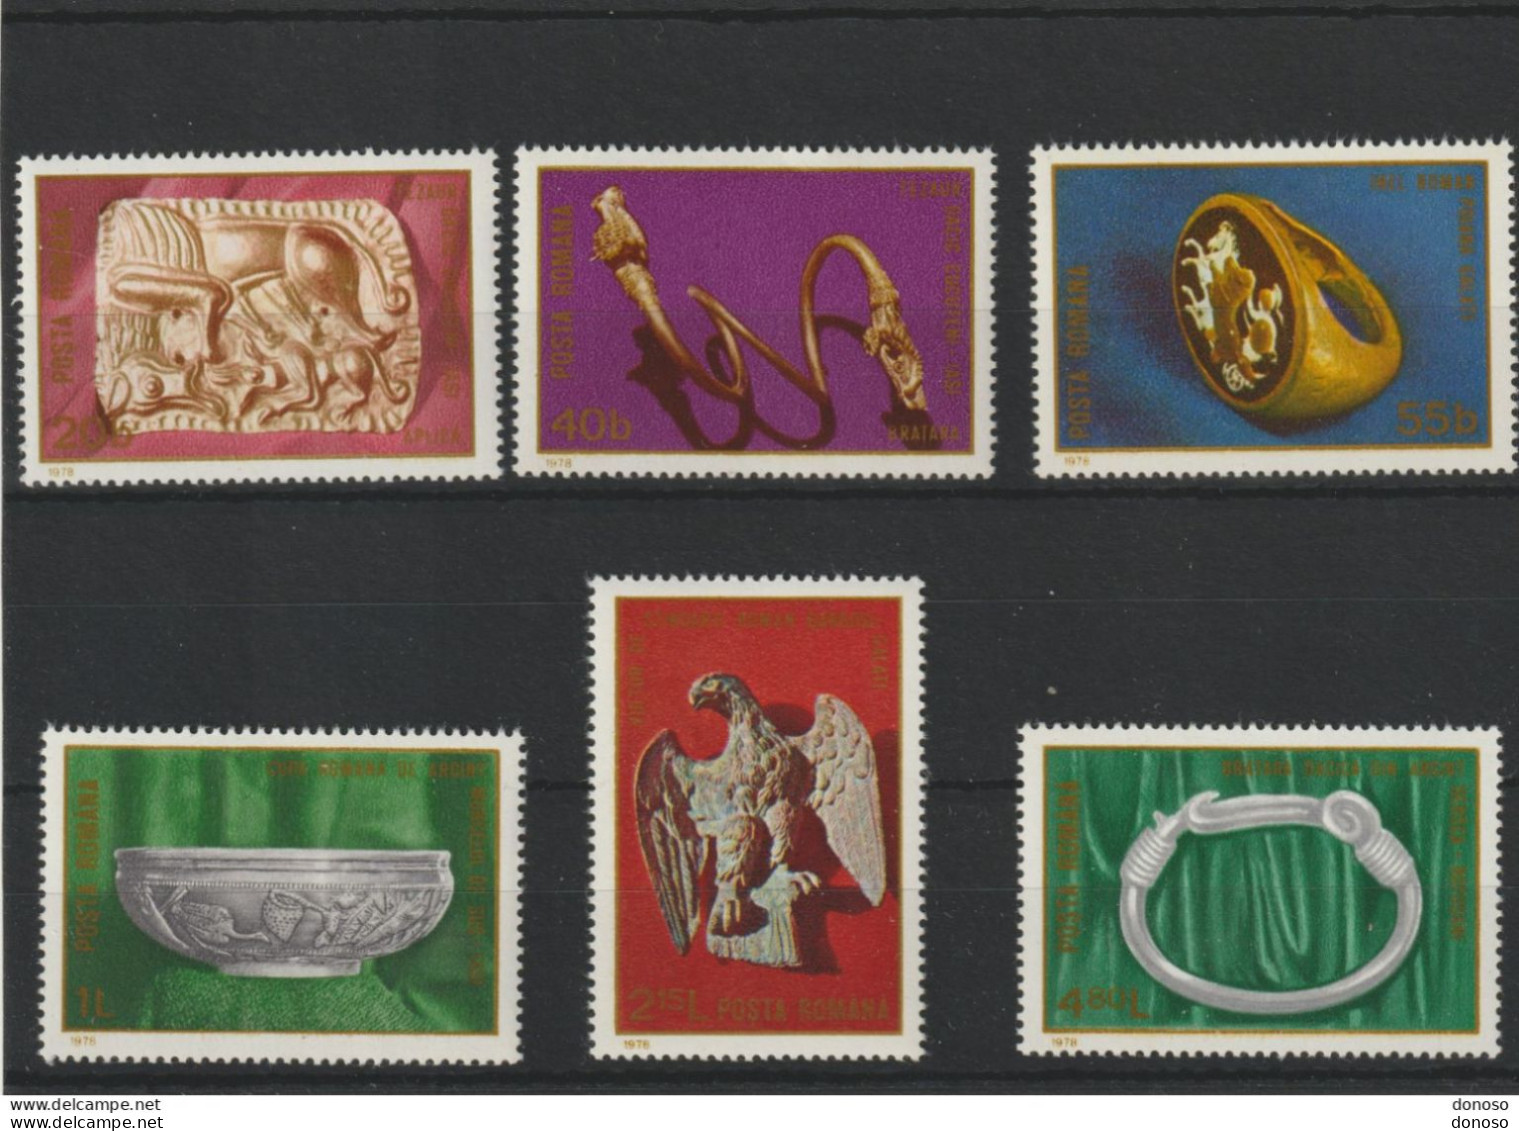 ROUMANIE 1978 ARCHEOLOGIE DACE Yvert 3133-3138, Michel 3548-3553 NEUF** MNH Cote 3,50 Euros - Unused Stamps